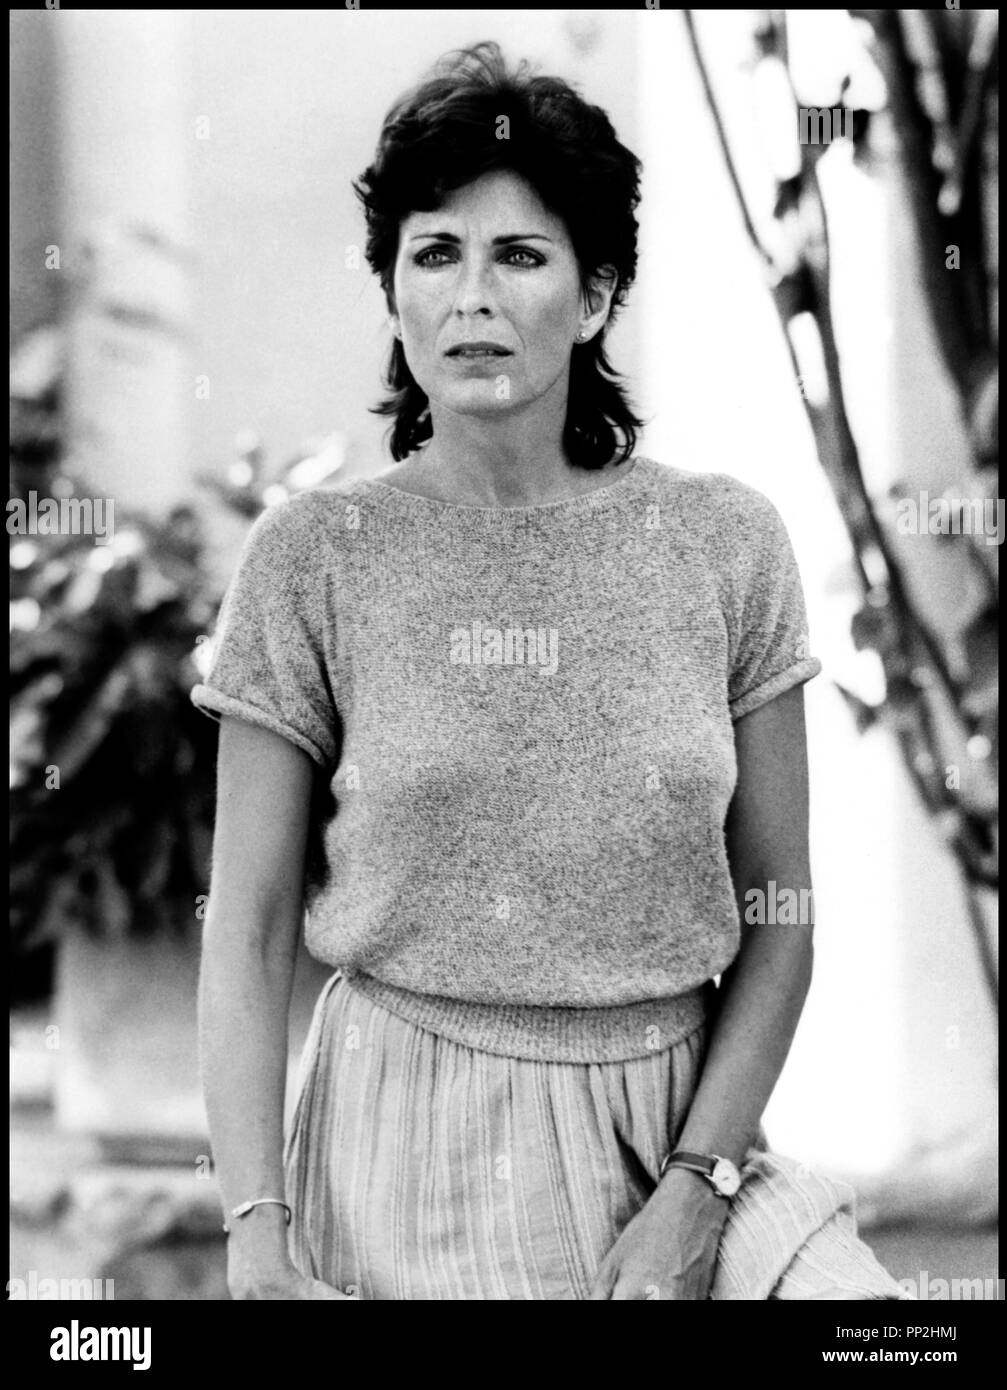 Pictures of joanna cassidy